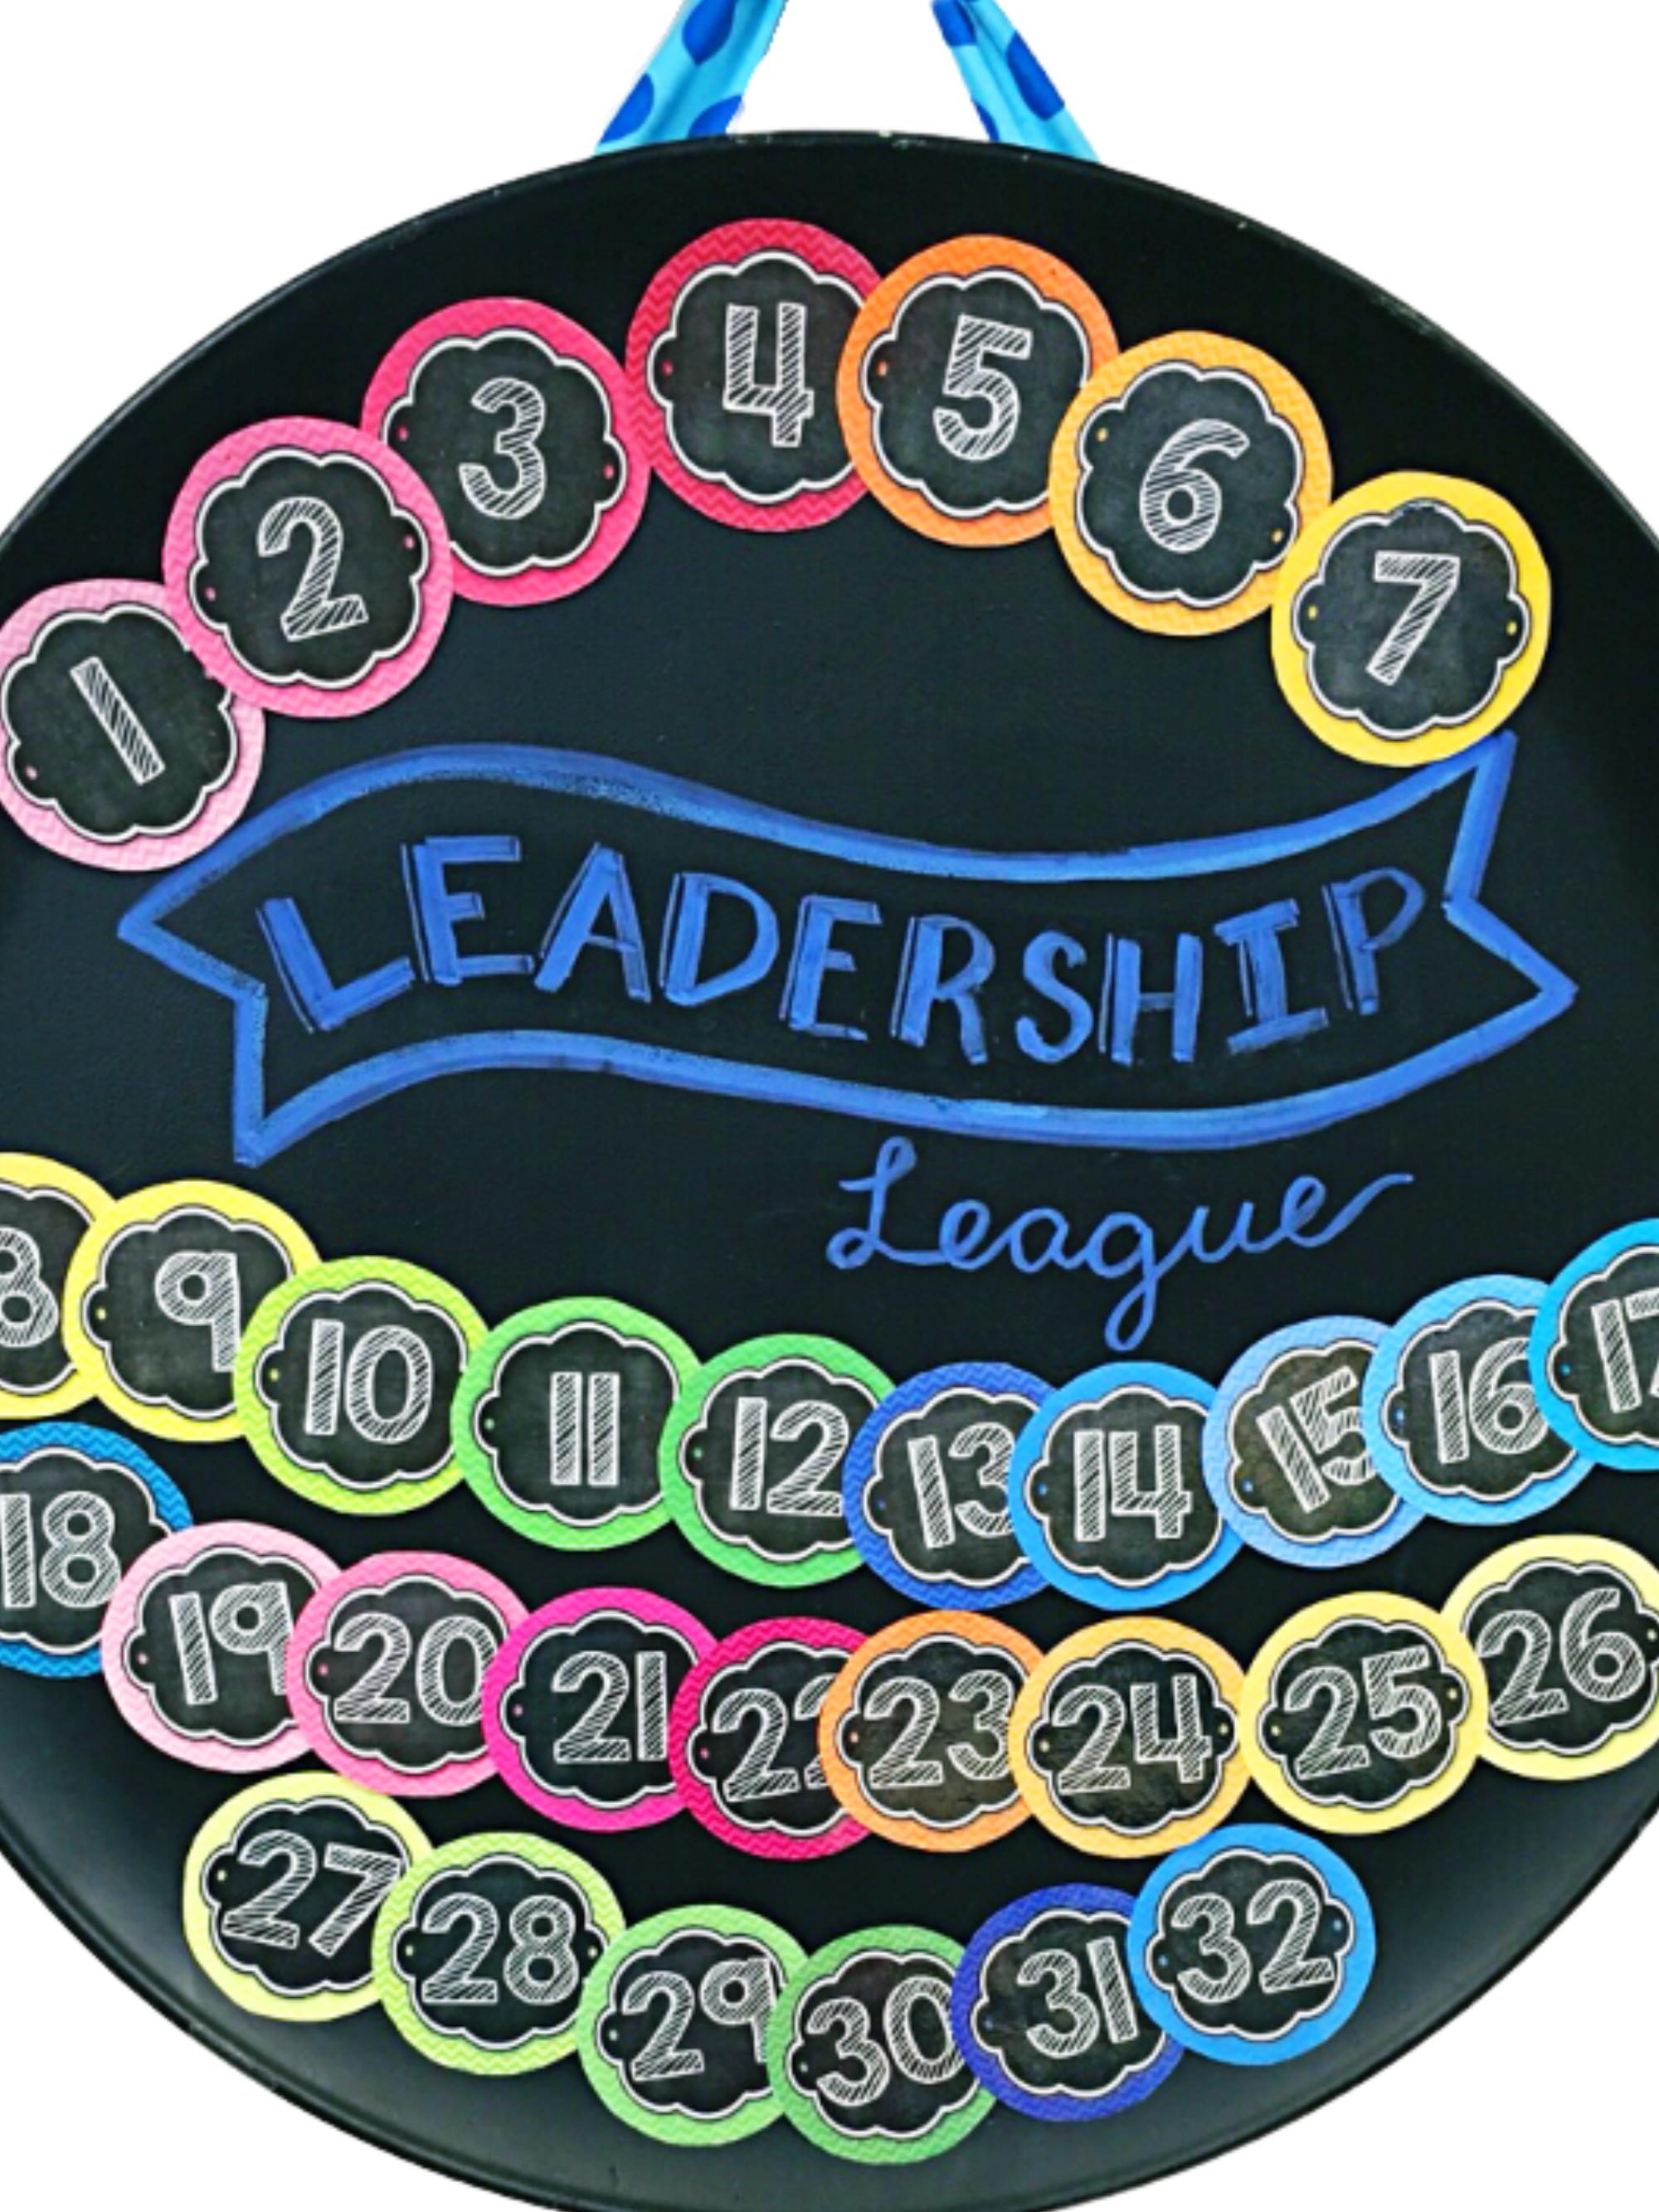 Leadership League board with student numbers on magnets